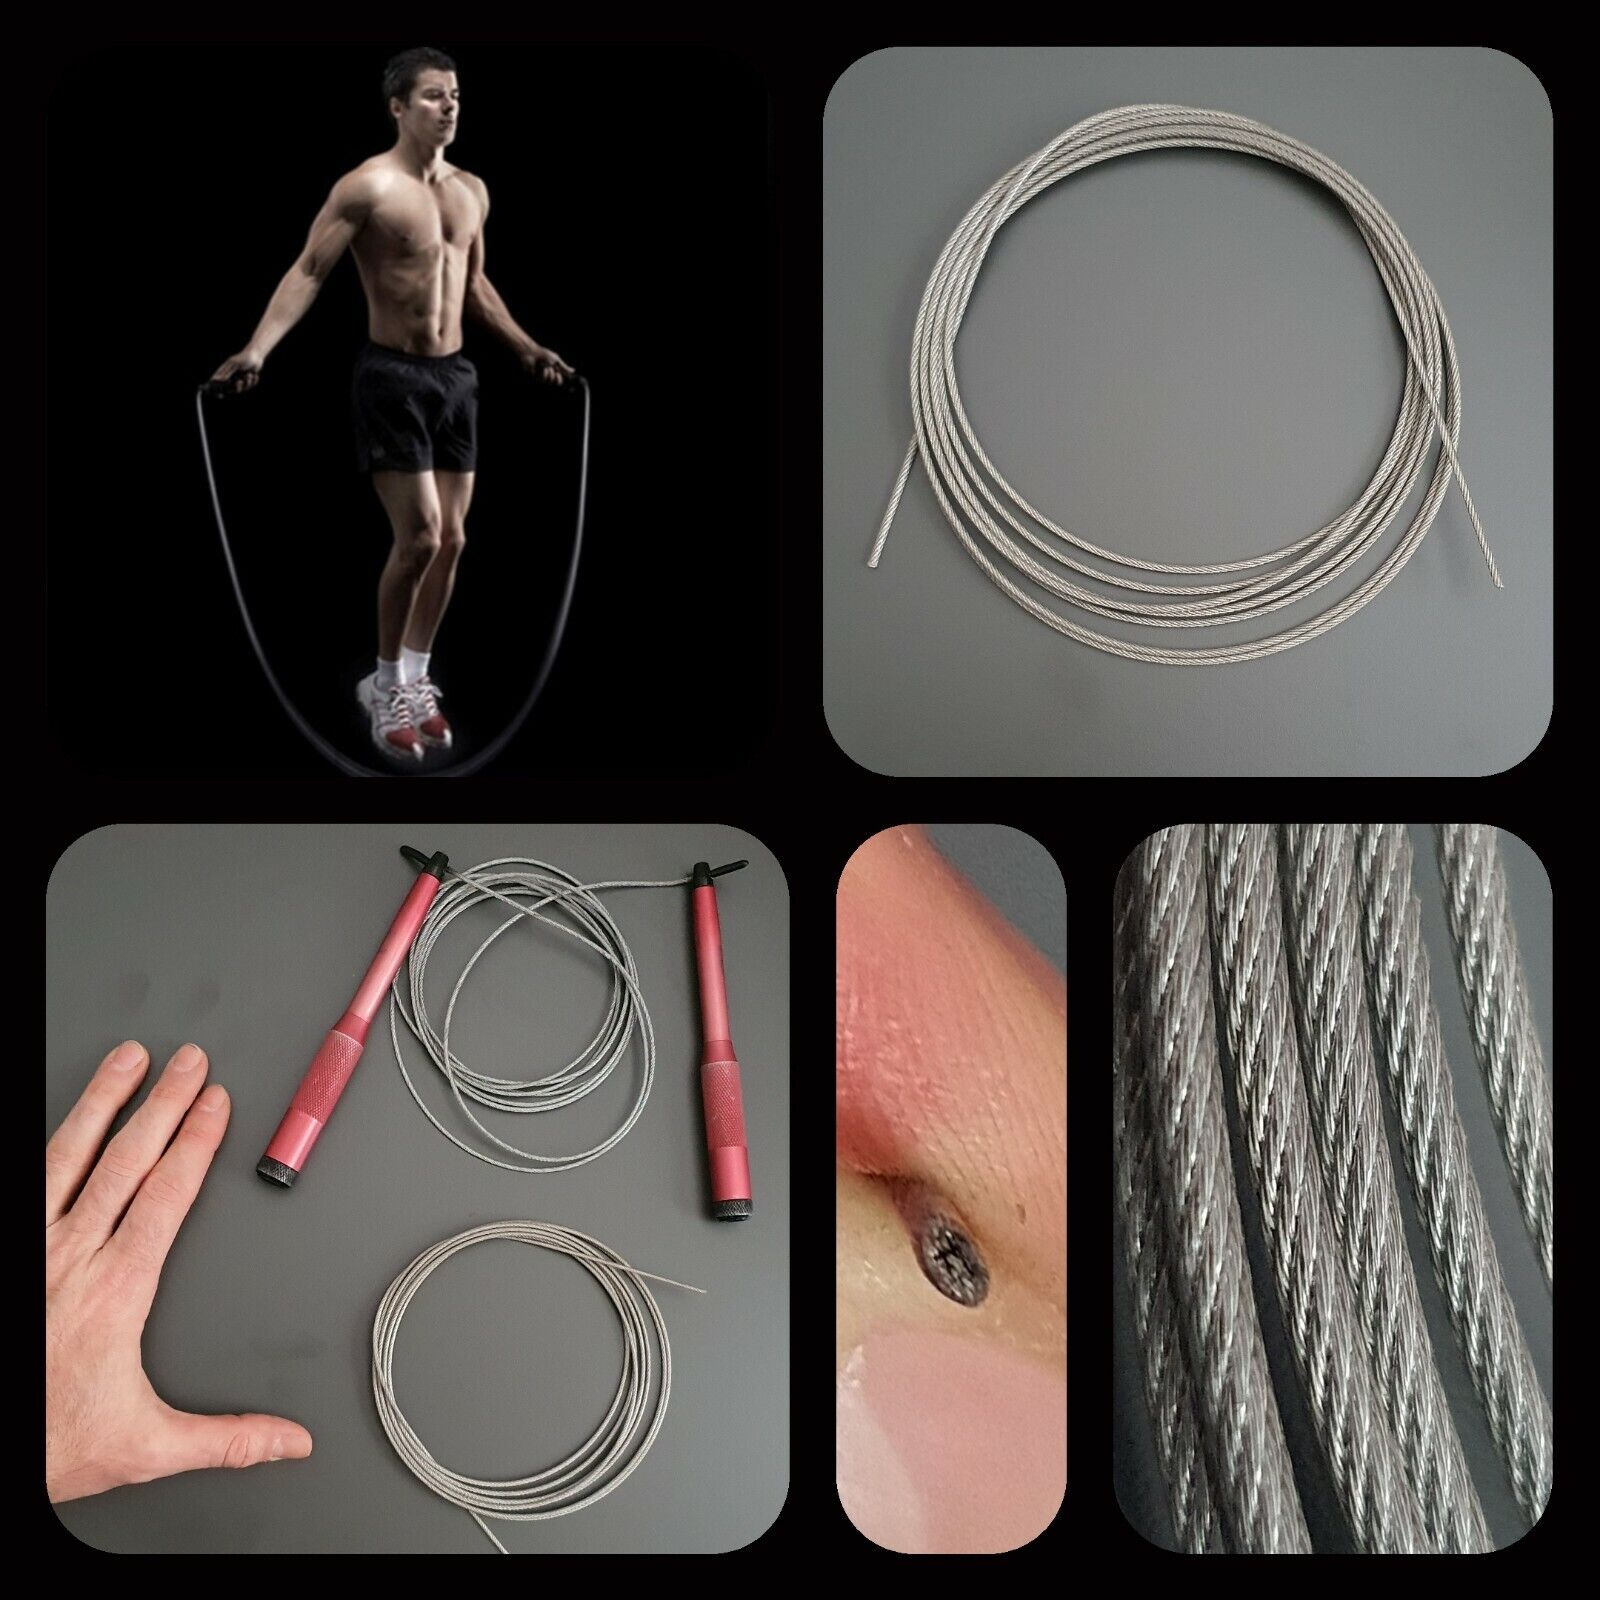 COMBA CABLE REPUESTO WIRE ROPE JUMPING ROPE (SOLO CABLE)